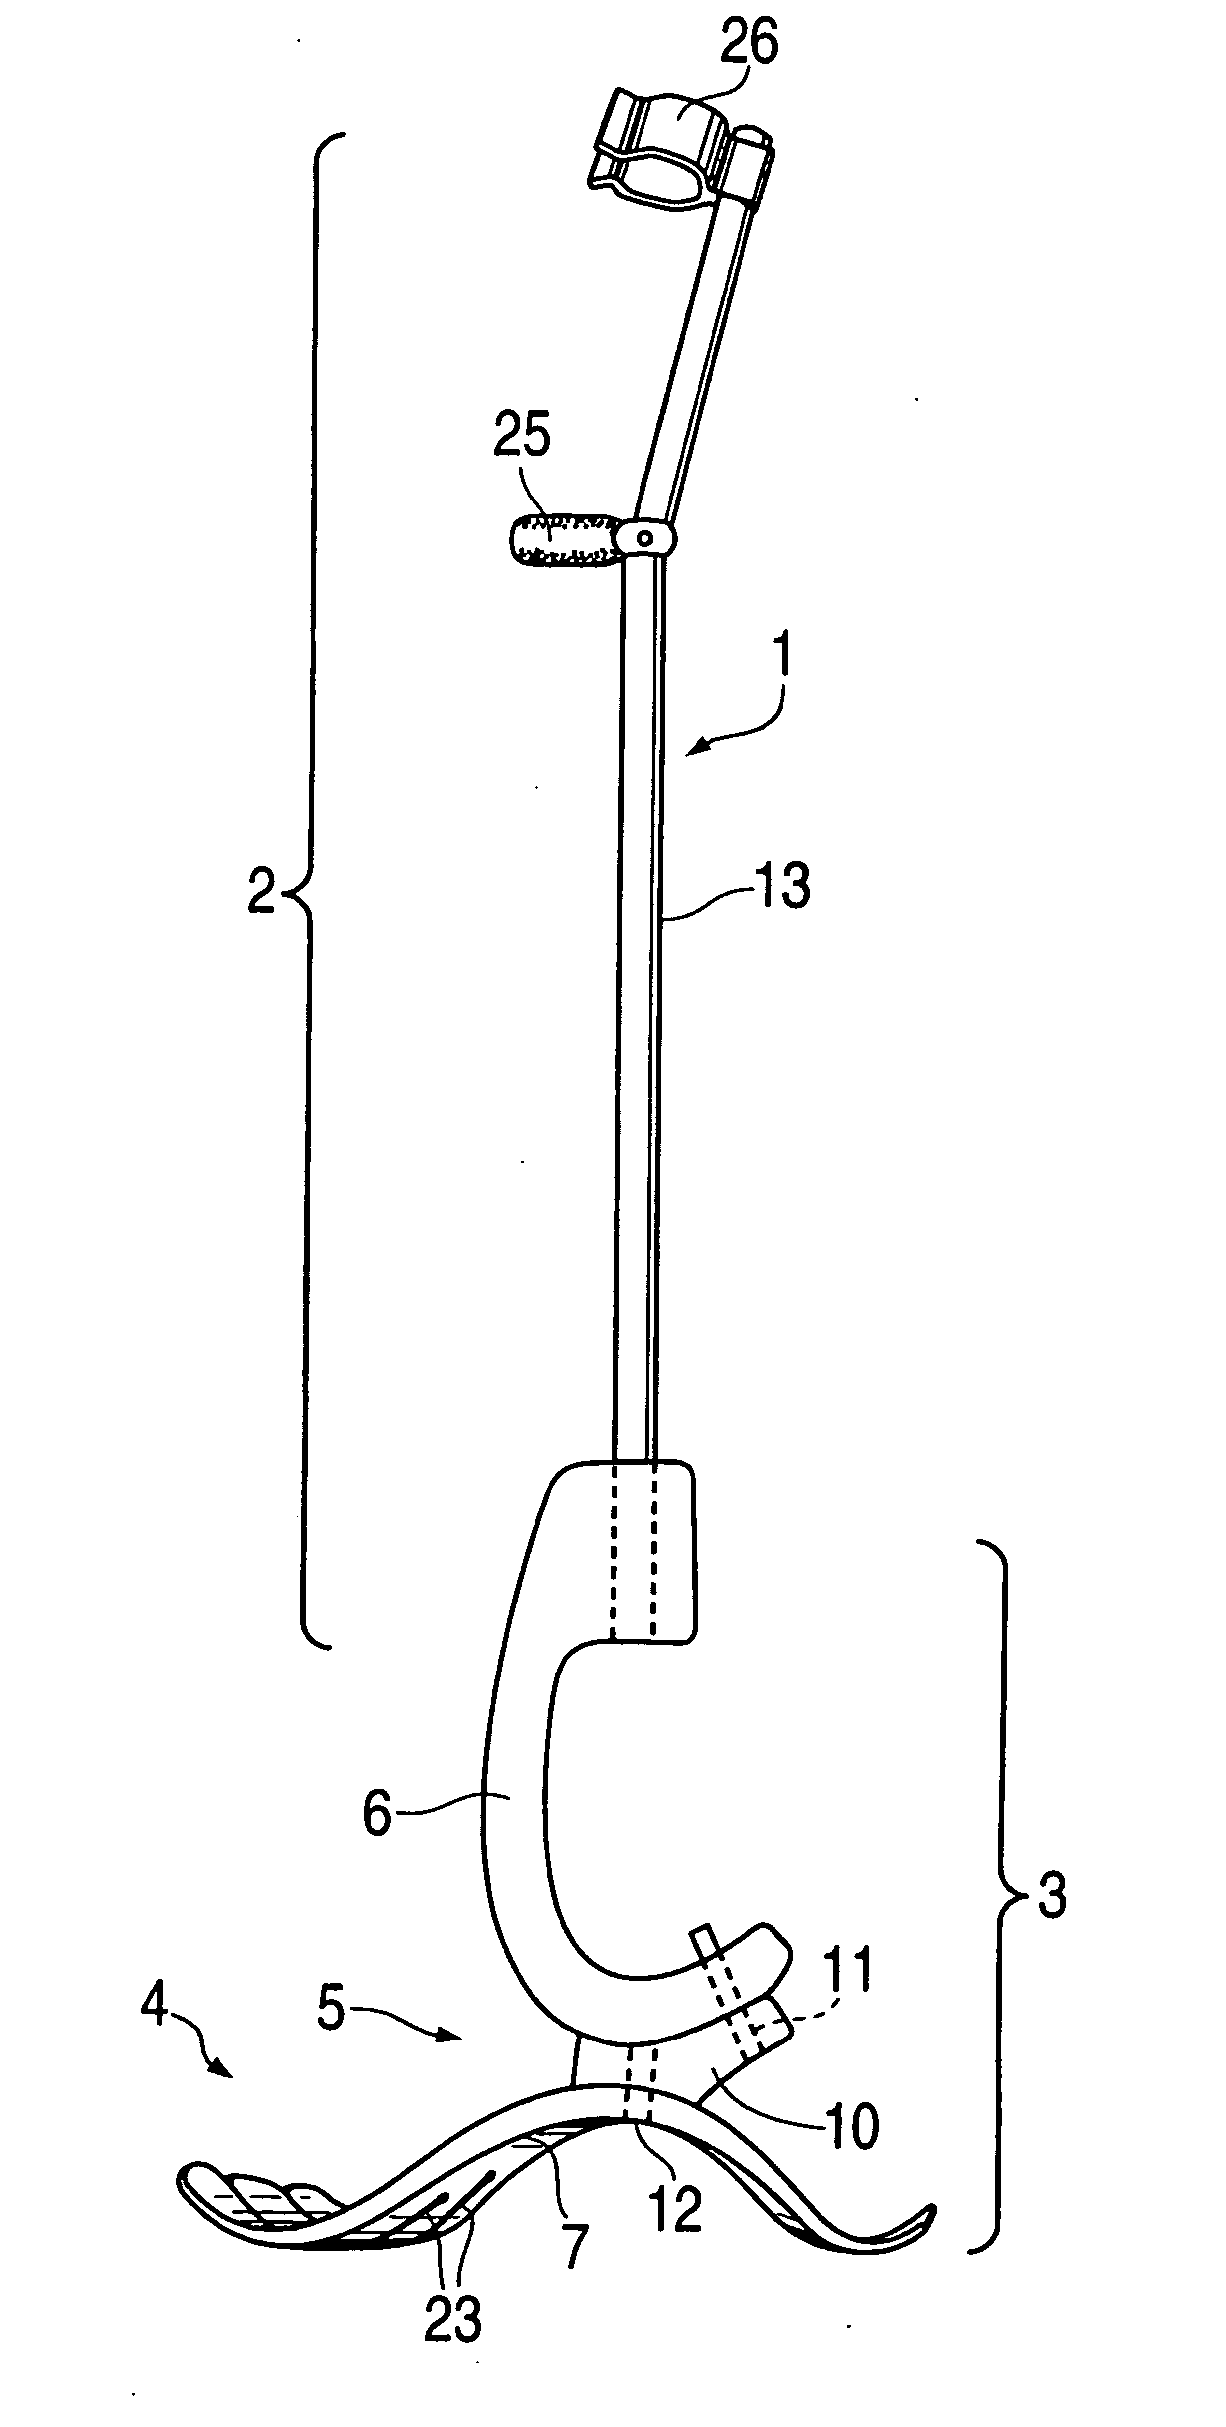 Mobility assistance apparatus and method